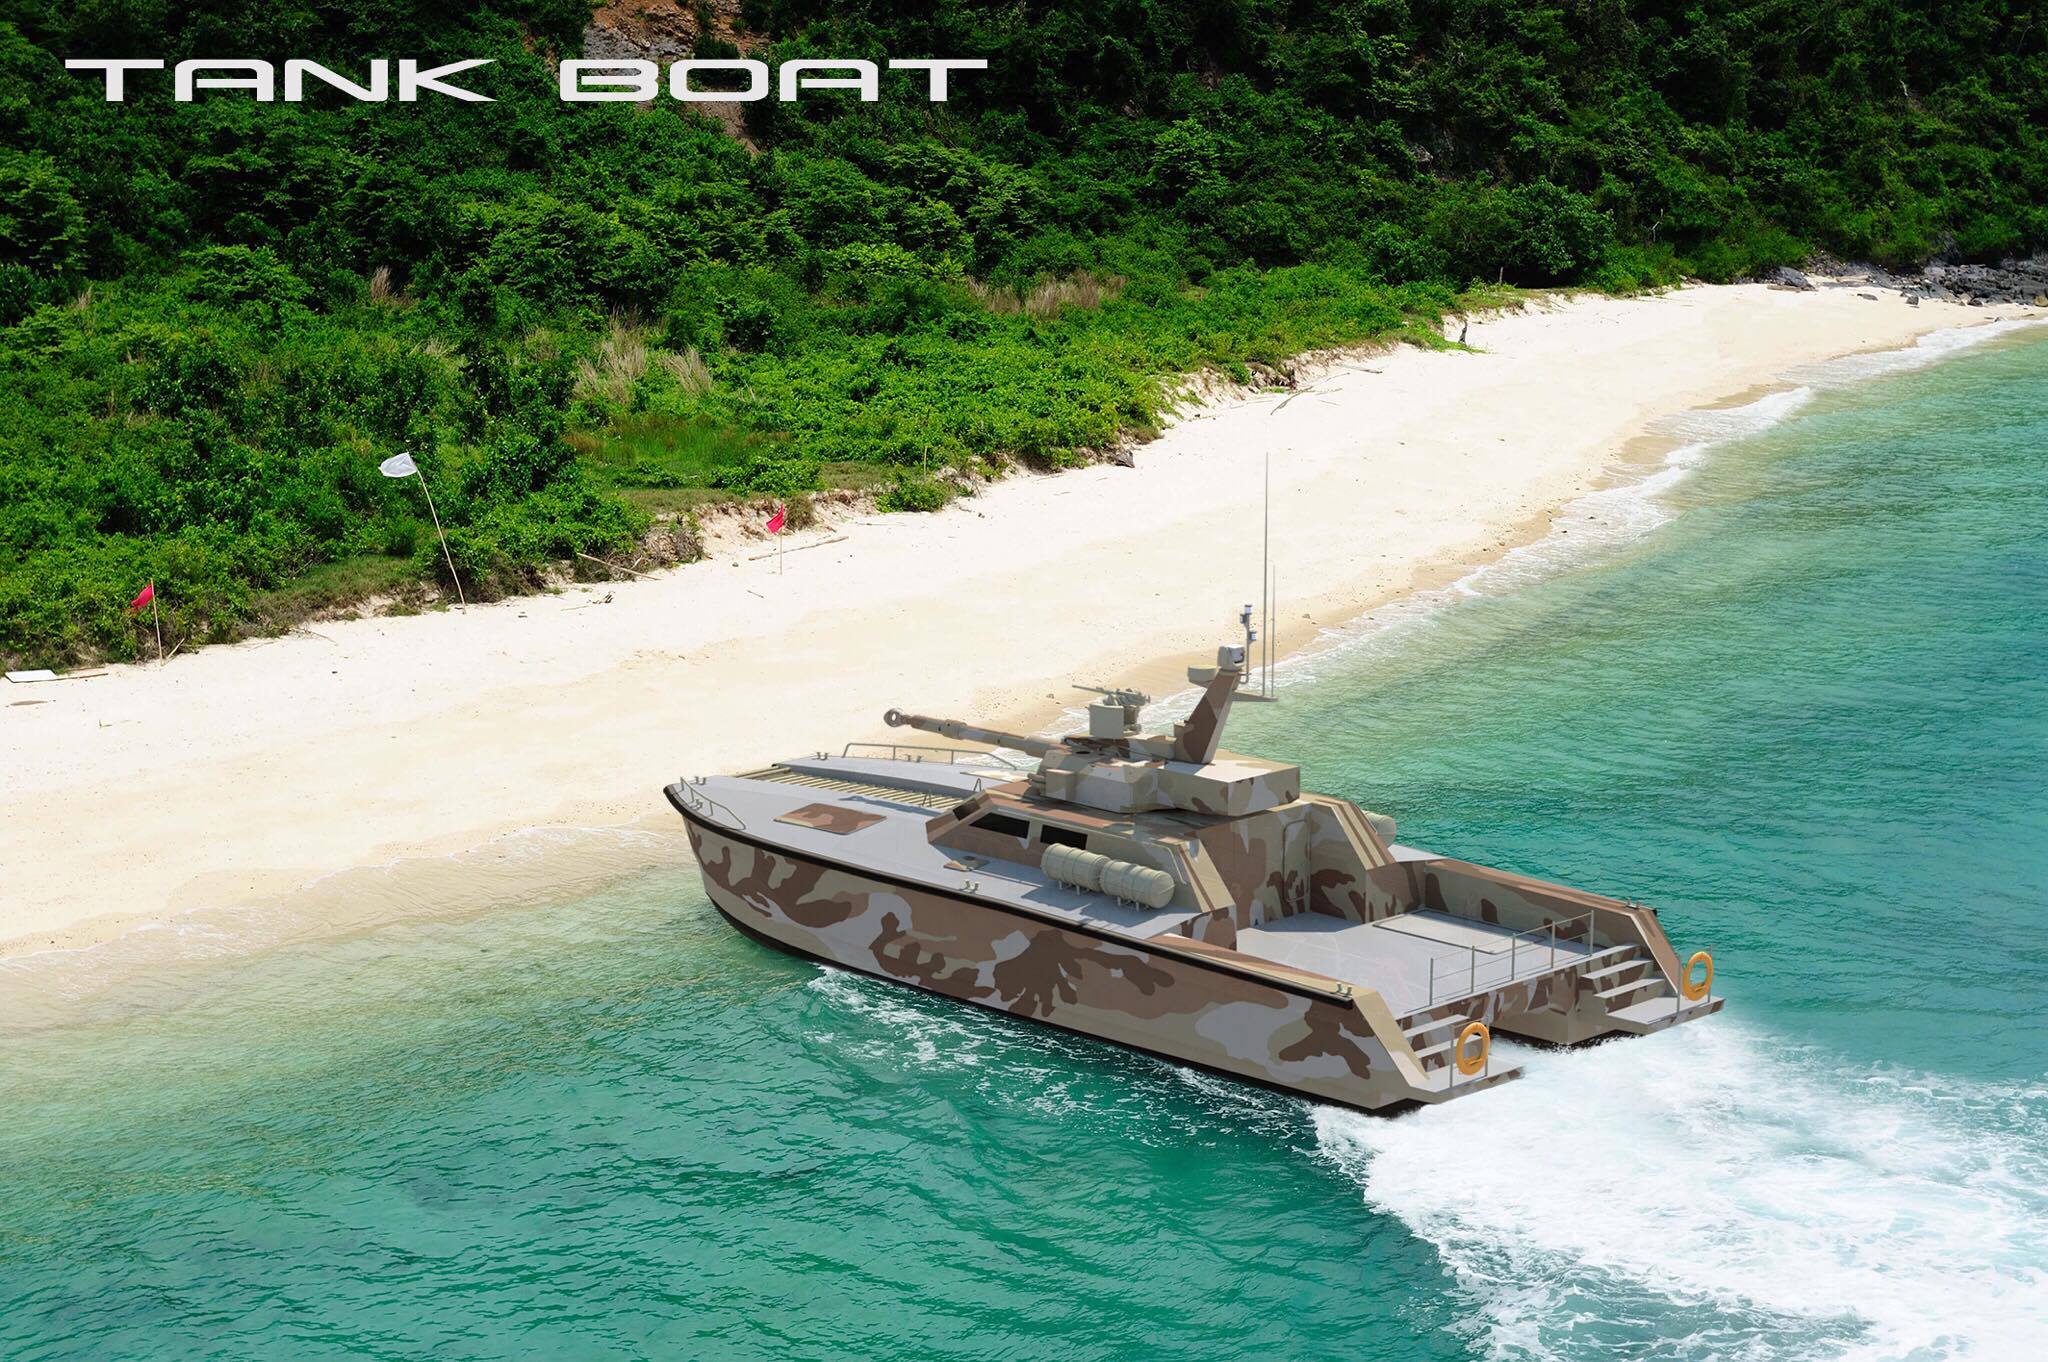 Indonesia wants to put a tank gun on a boat